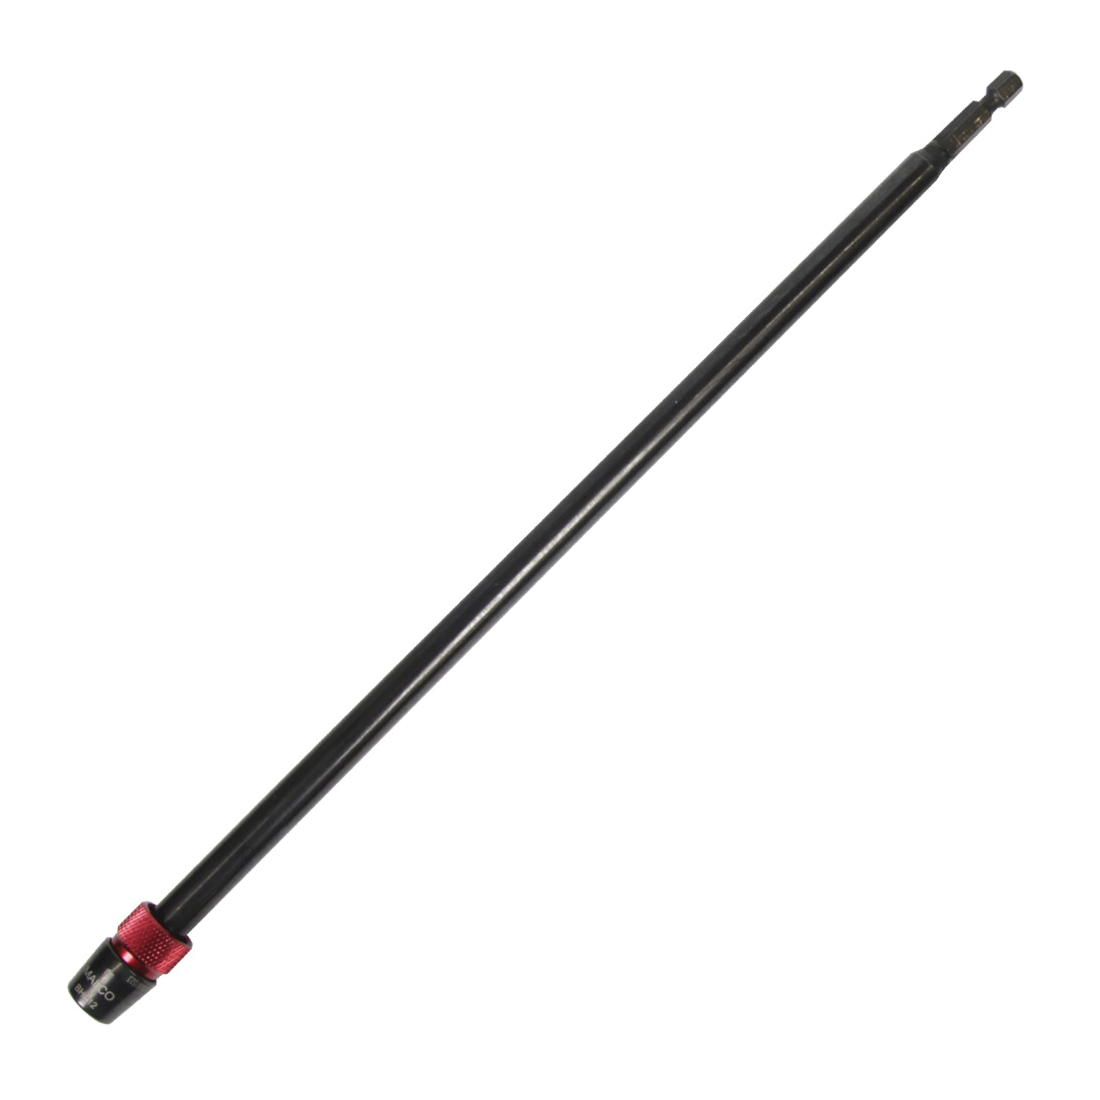 Malco® BHE6 Power Bit Extension, 1/4 in Shank, 6 in L, Steel, For Use With: CONNEXT Driver Handles